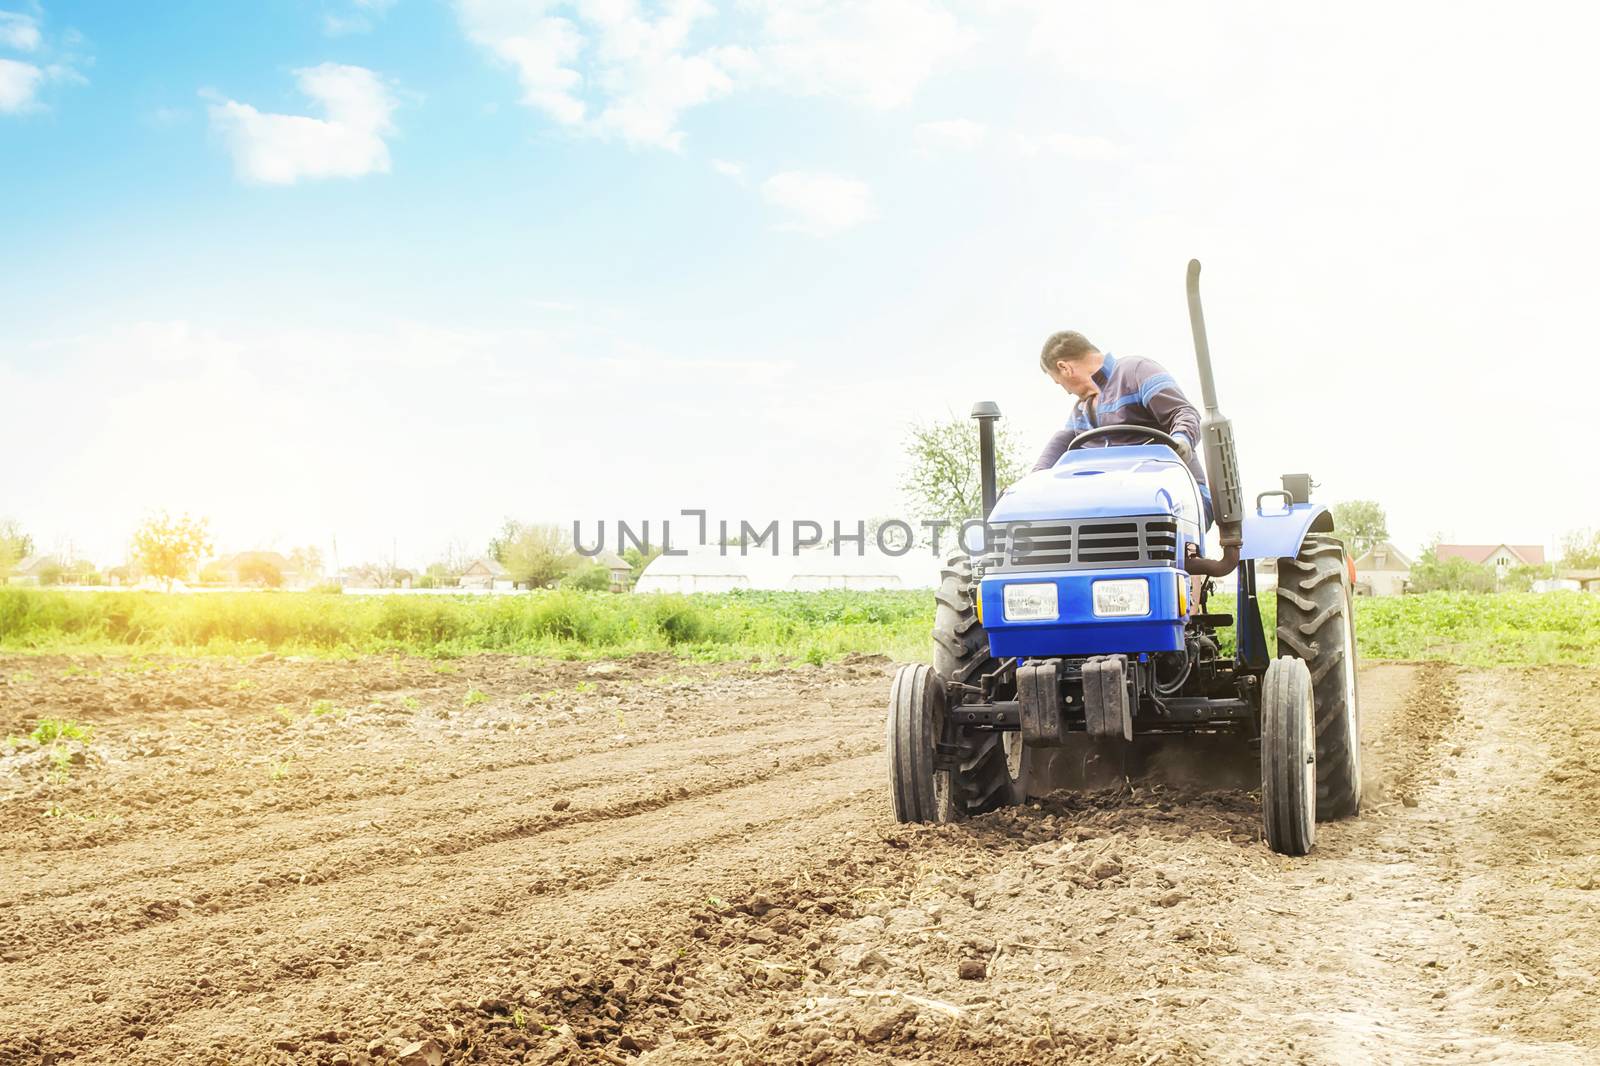 Farmer on a tractor with milling machine loosens, grinds and mixes soil. Loosening surface, cultivating the land for further planting. Farming and agriculture. Use of agricultural machinery on a farm. by iLixe48